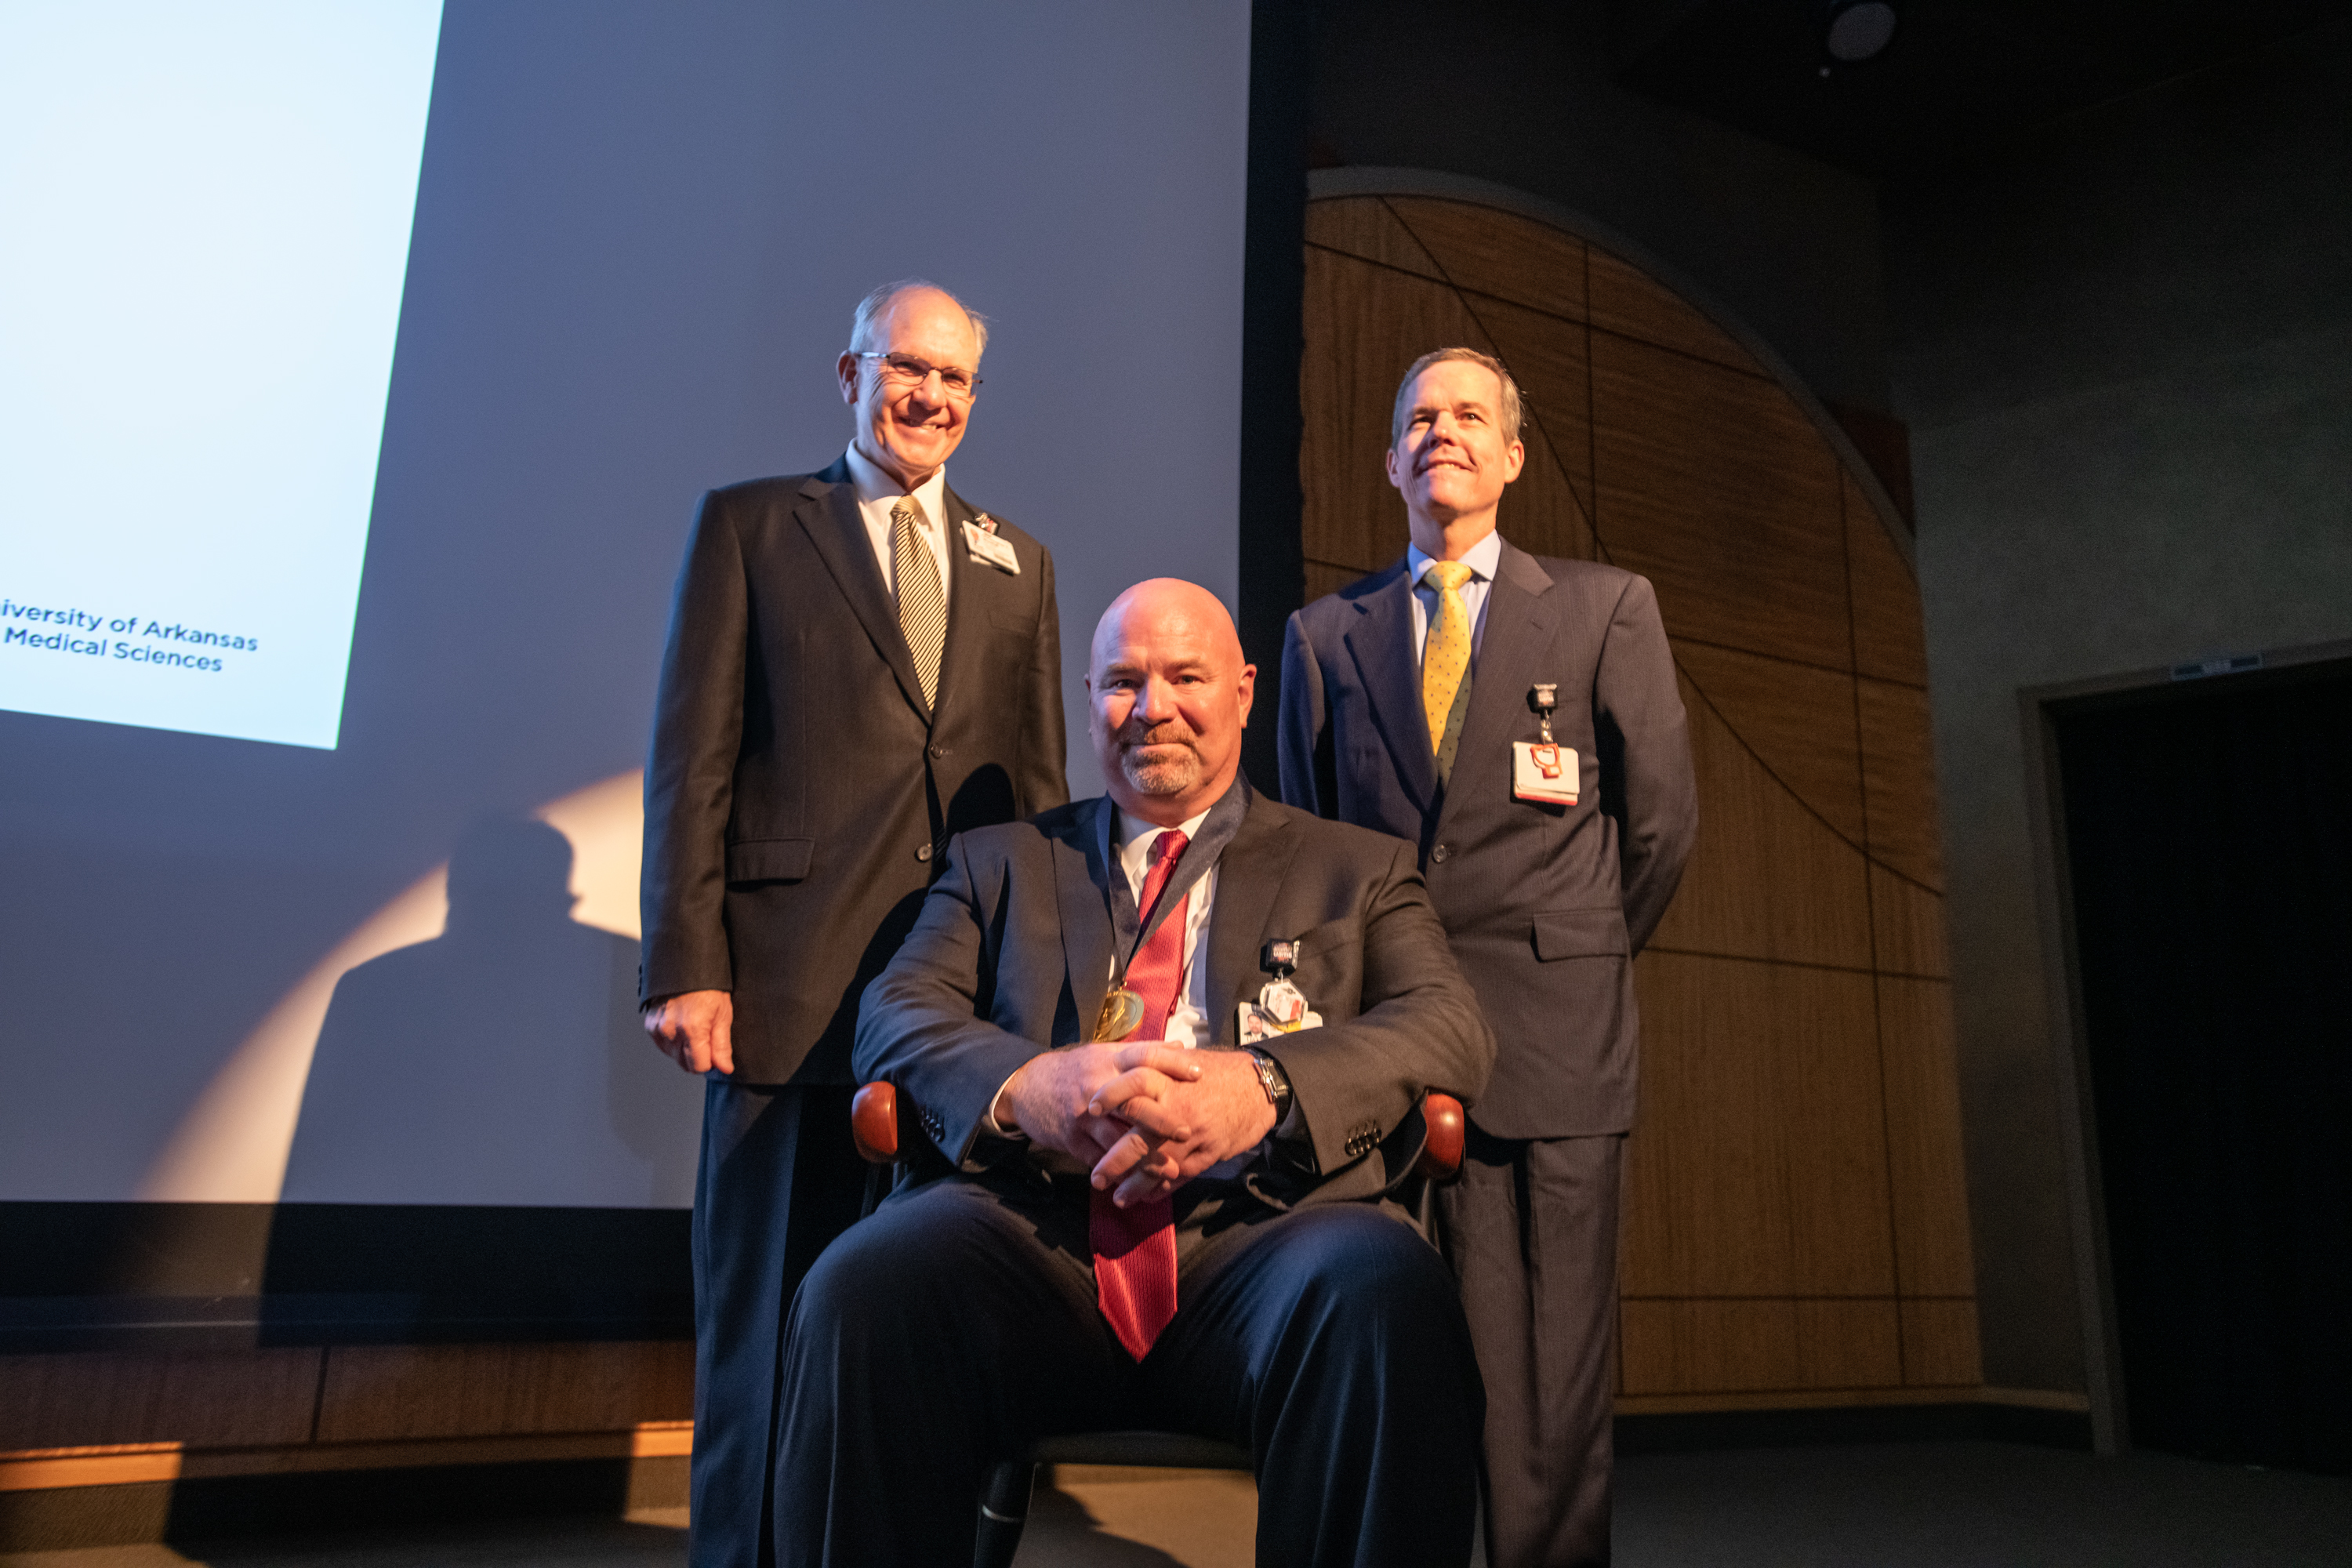 J.D. Day, M.D. (seated) wears his commemorative medallion from the investiture alongside UAMS College of Medicine Dean Christopher T. Westfall, M.D., FACS and UAMS Chancellor Cam Patterson, M.D., MBA.